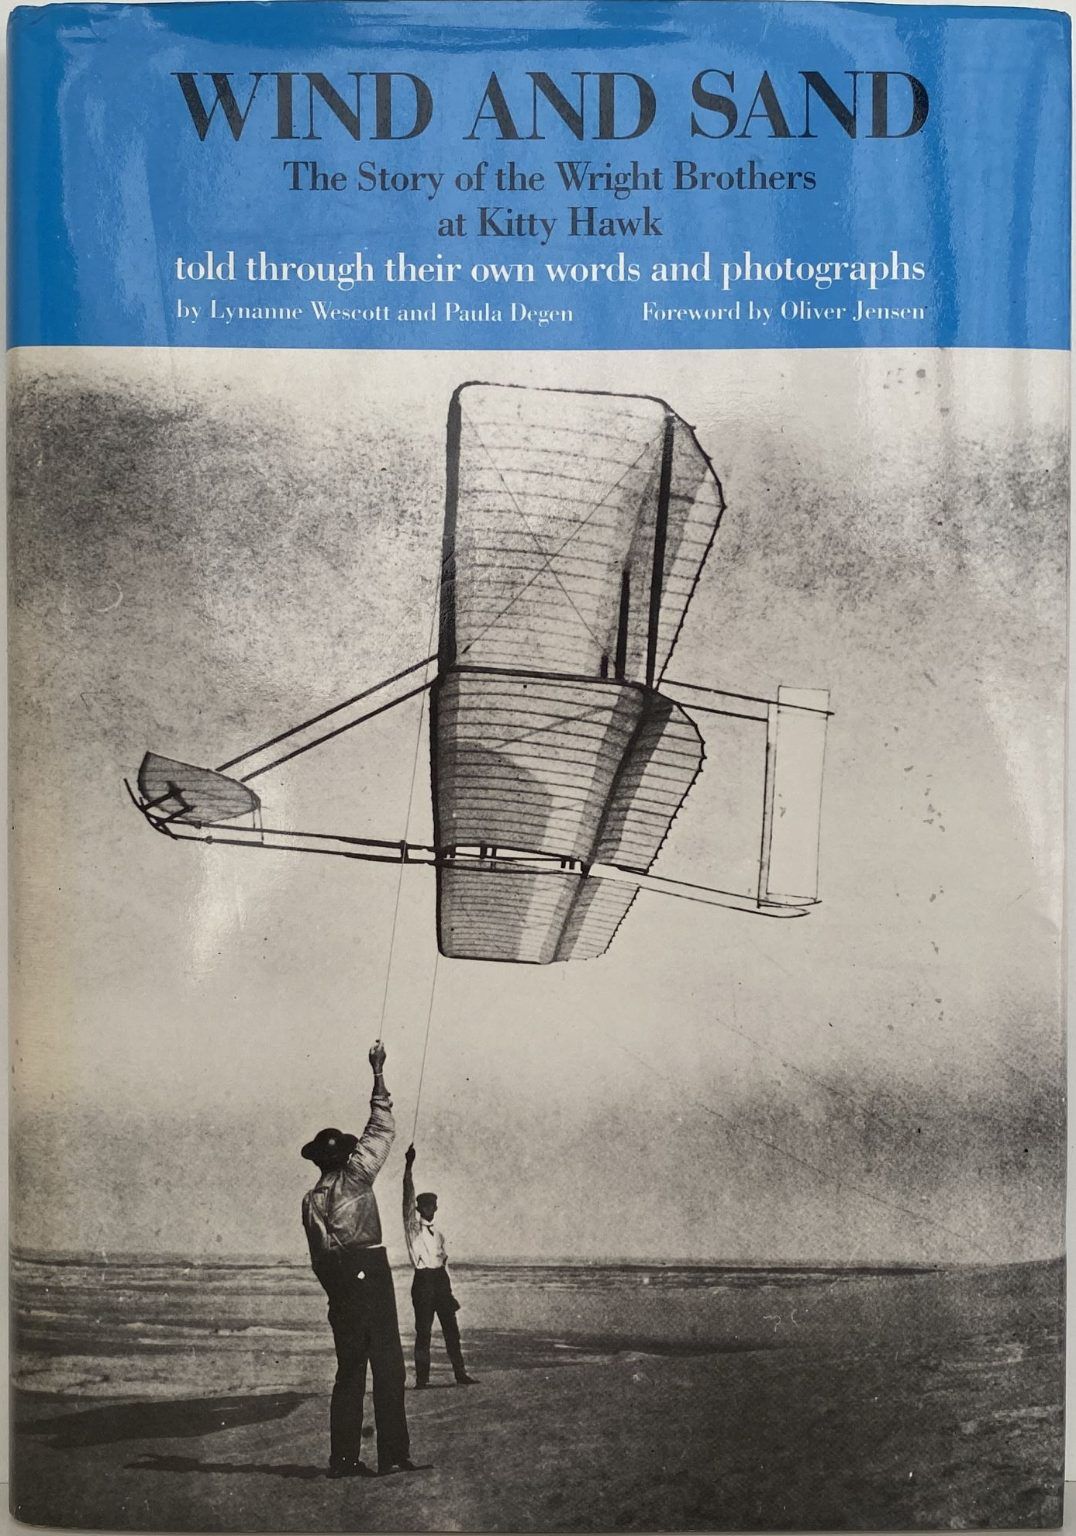 WIND AND SAND: The Story of the Wright Brothers at Kitty Hawk